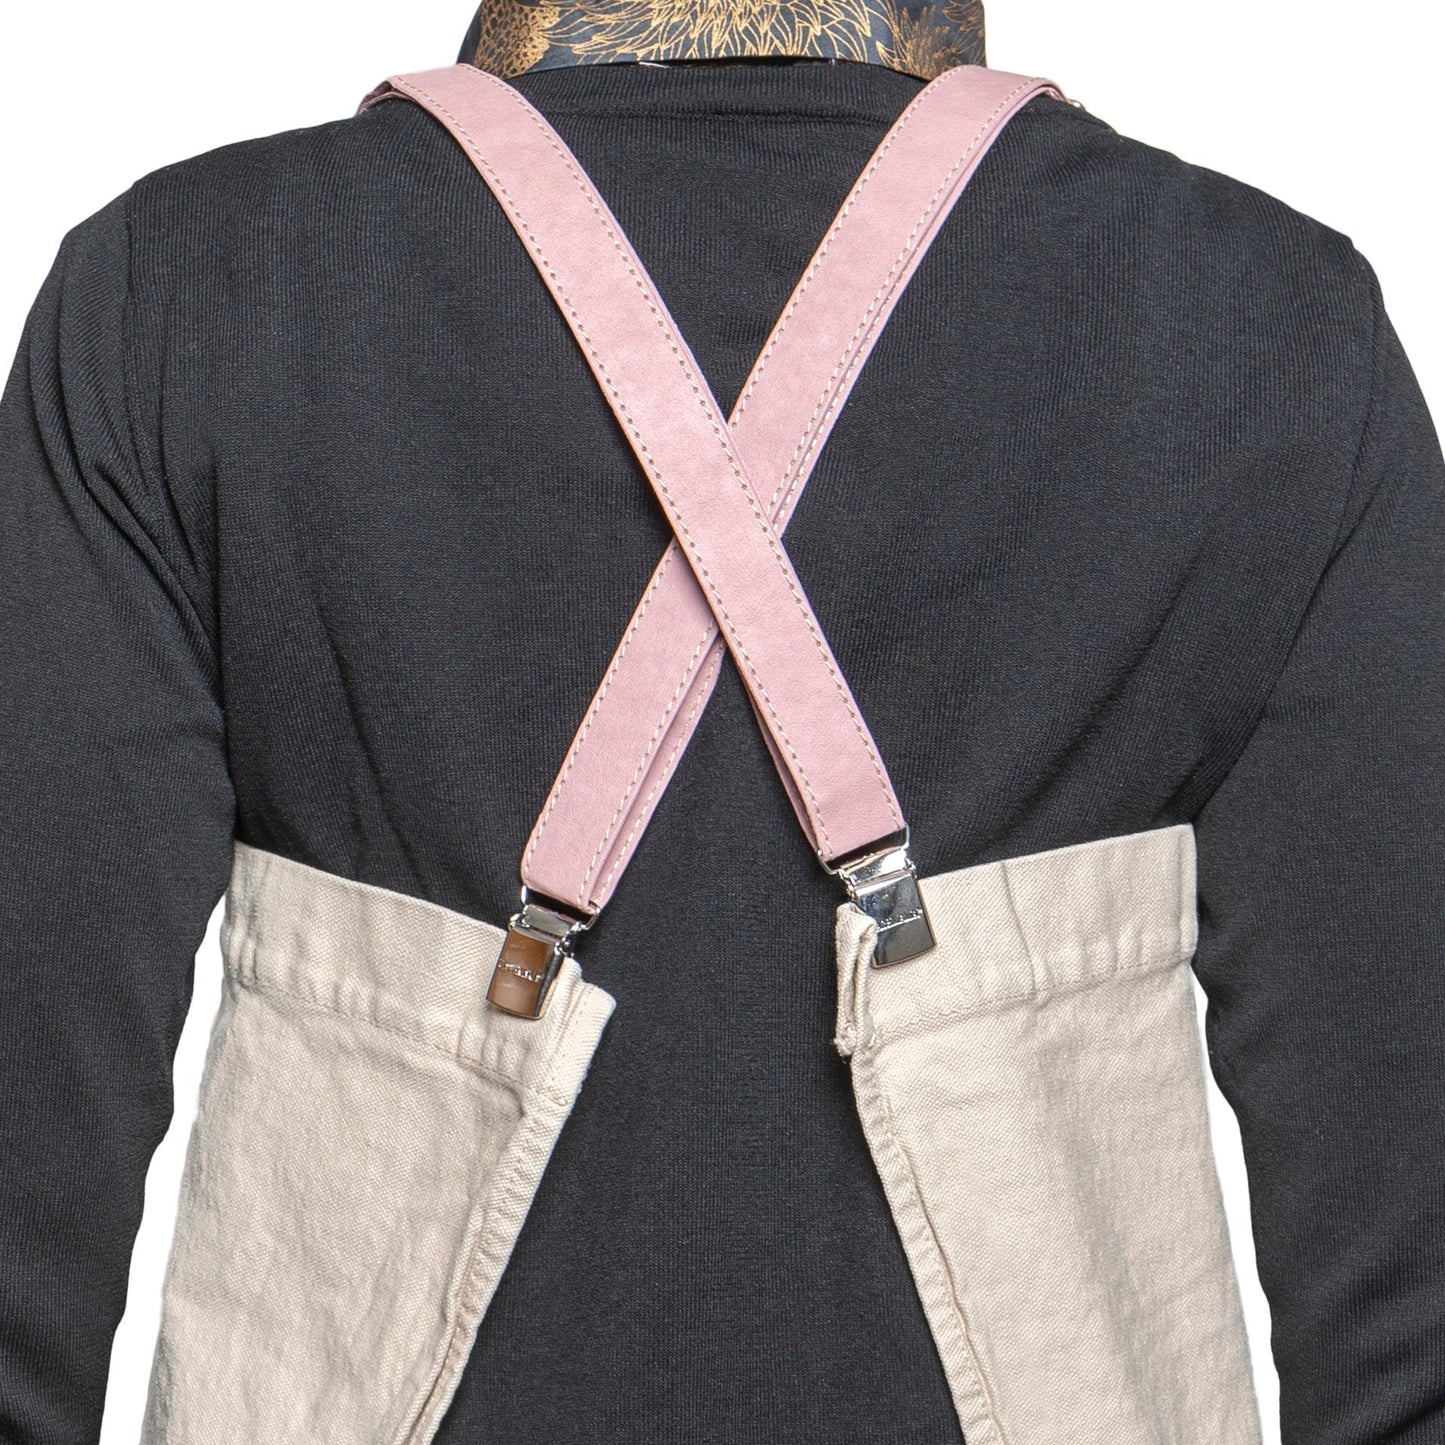 A person is shown from the back wearing a black long-sleeved t-shirt and a washable paper apron with washable paper and metal clip straps. The apron is beige in colour with pink straps.